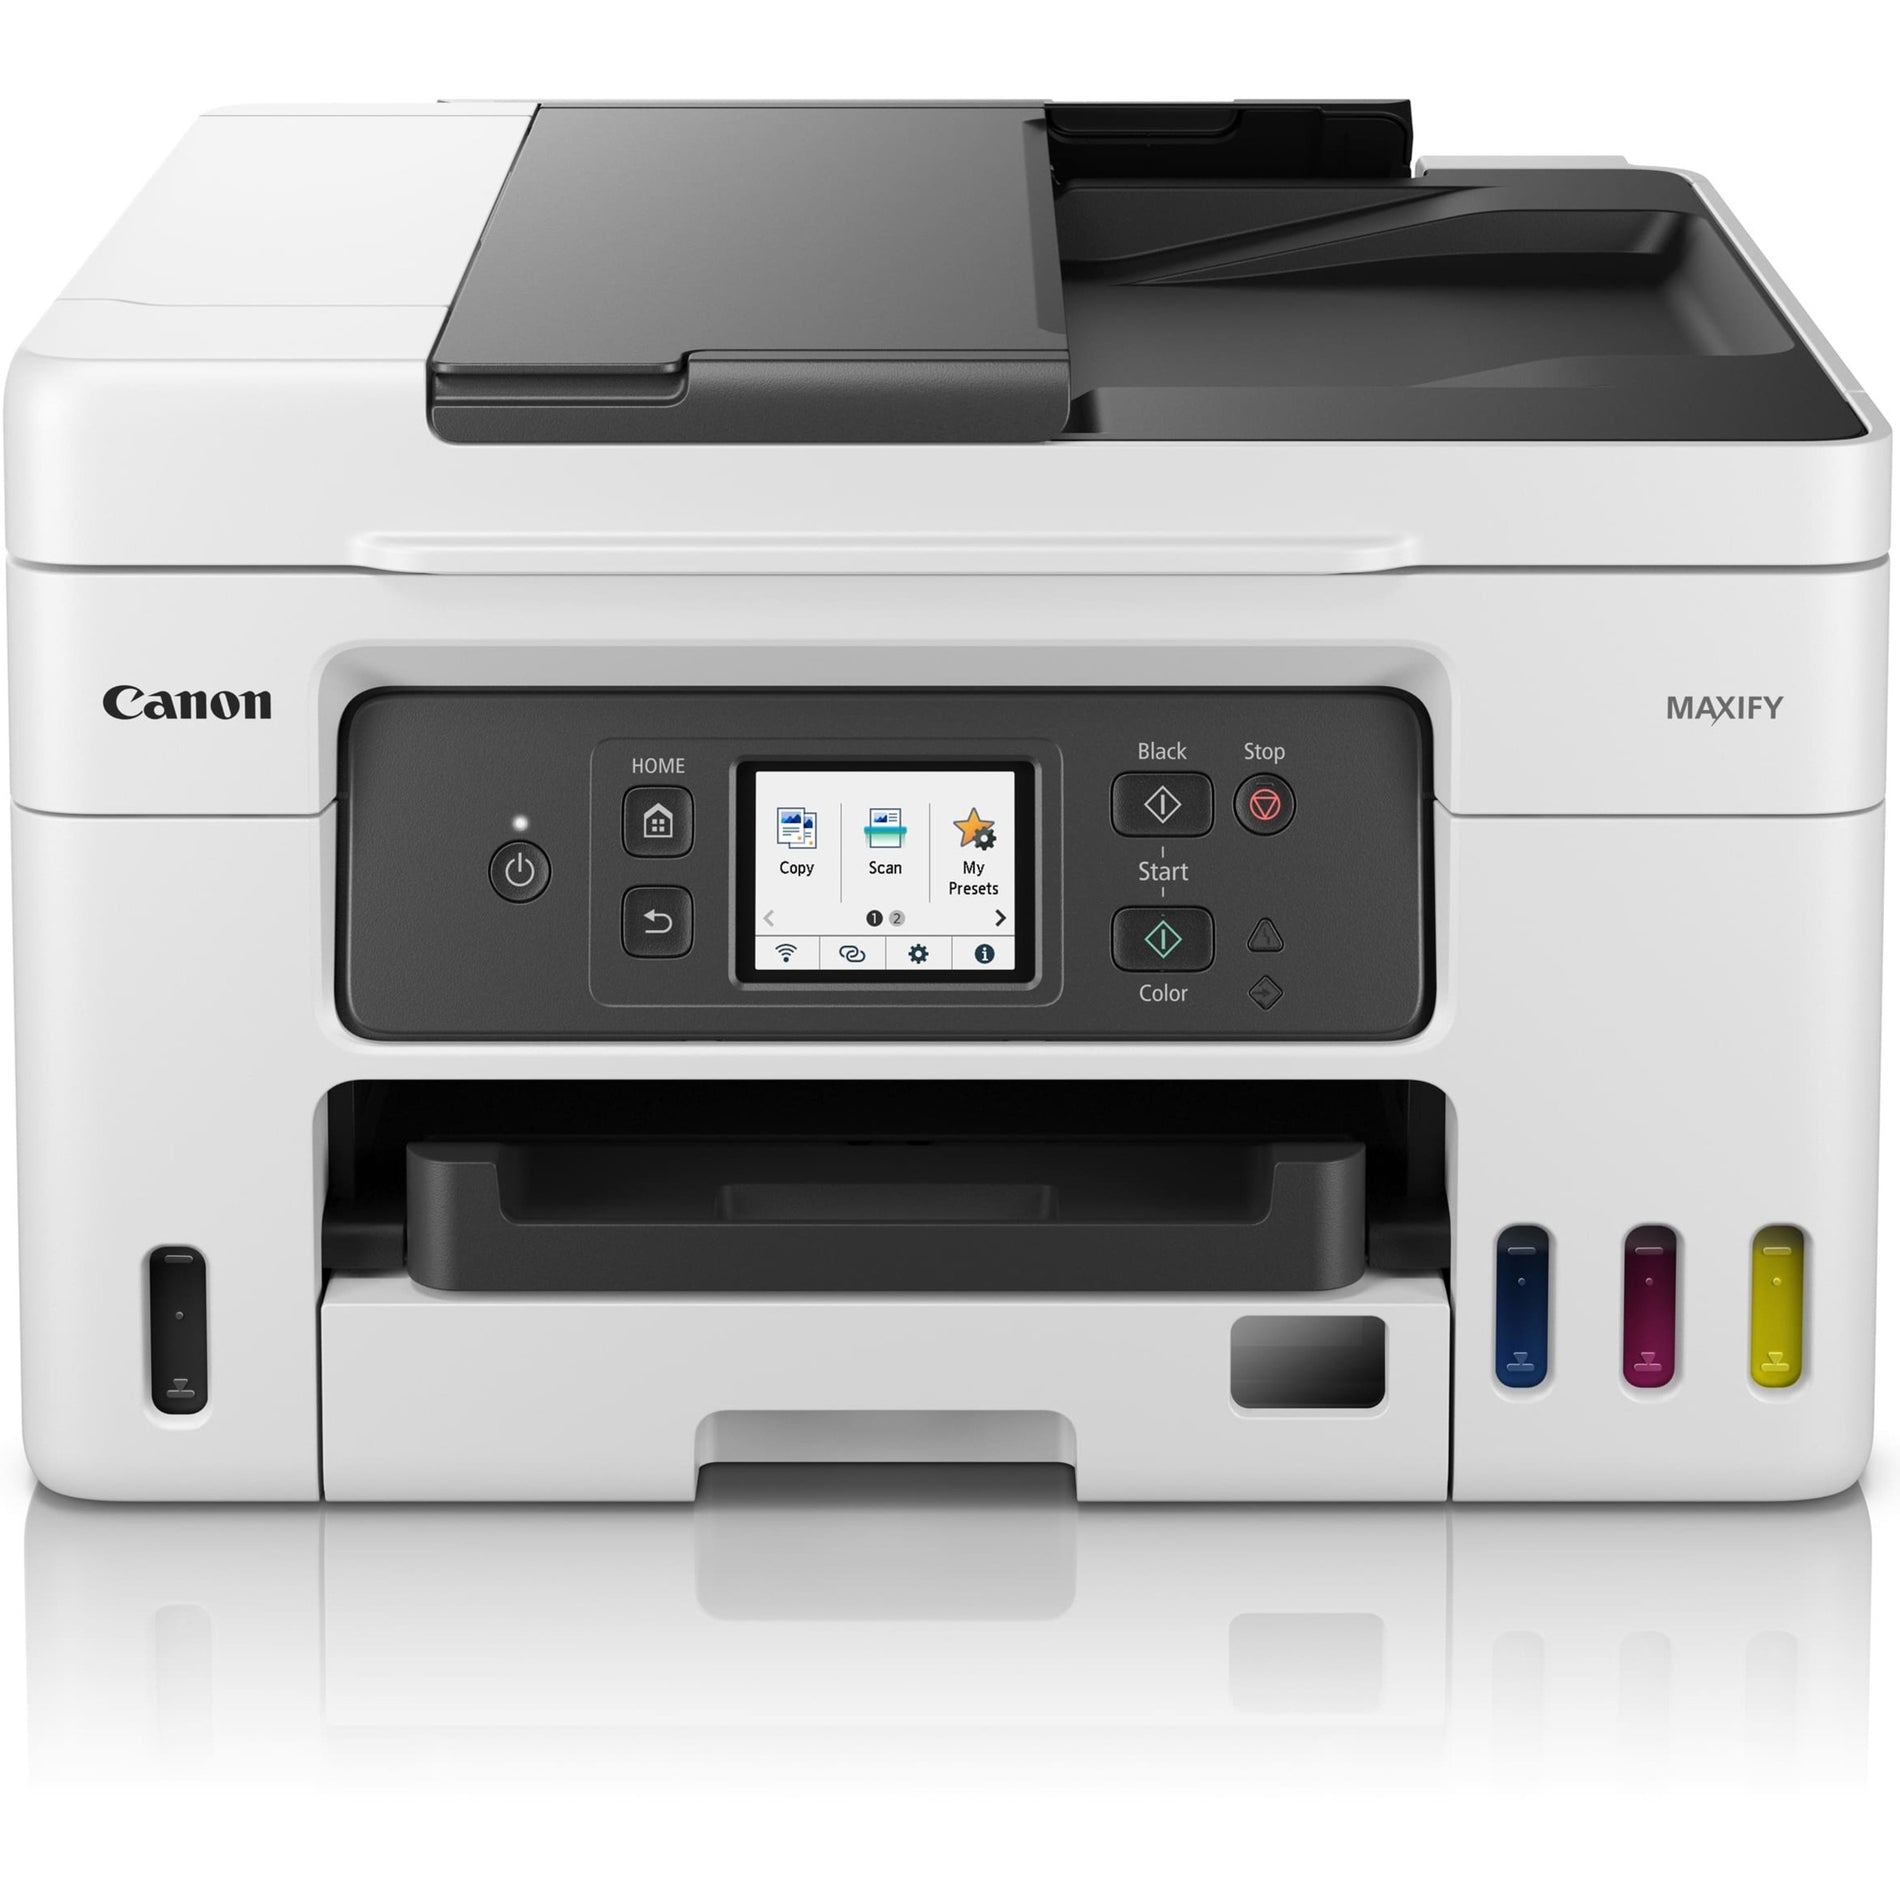 Canon 5779C002 MAXIFY GX4020 Wireless MegaTank Small Office All-In-One Printer, Color Inkjet Multifunction Printer